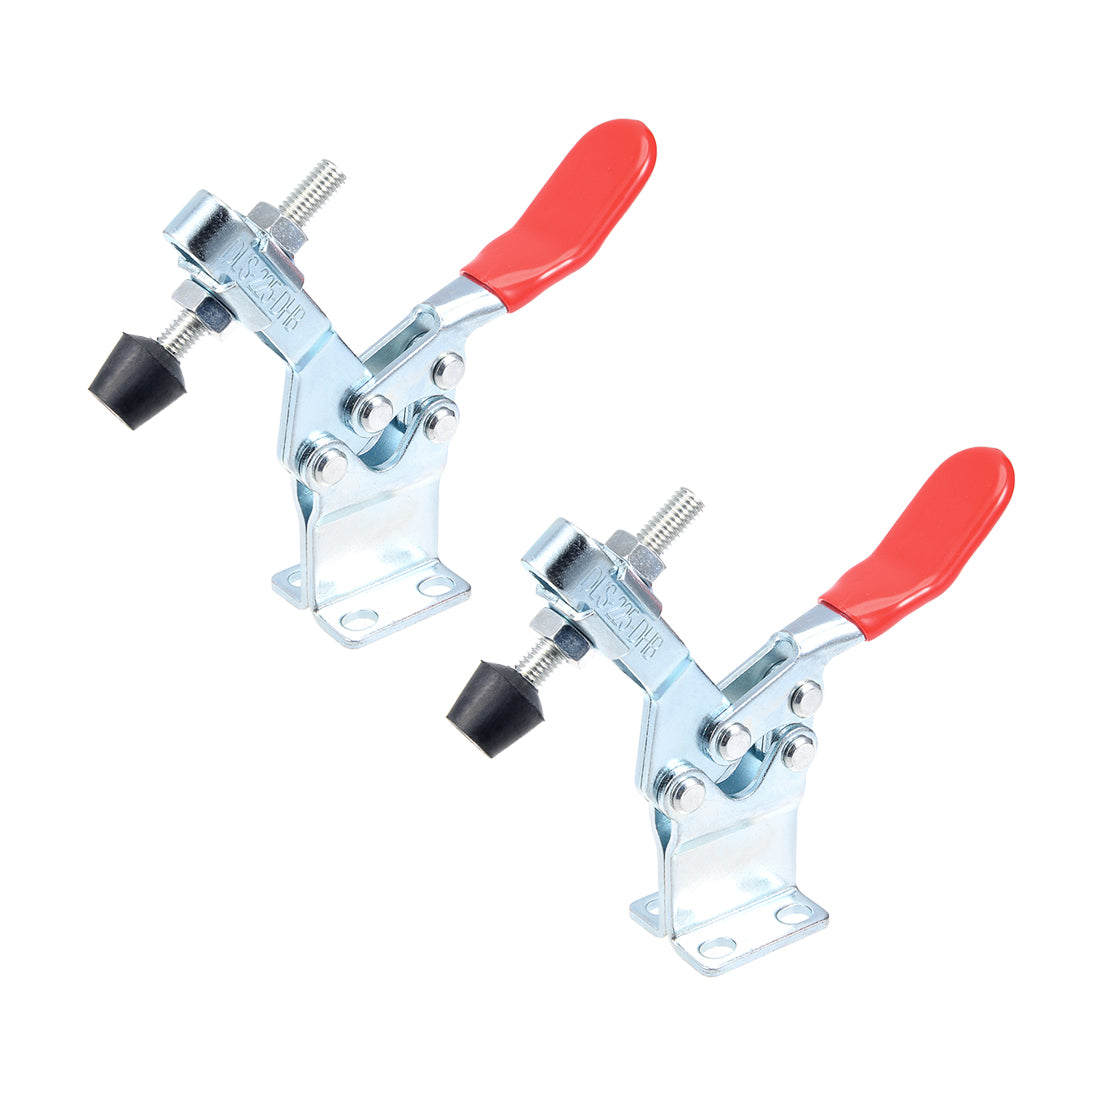 uxcell Uxcell Toggle Clamp DLS-225-DHB Horizontal Clamp Quick Release Tool 230Kg 506lbs Capacity 2pcs